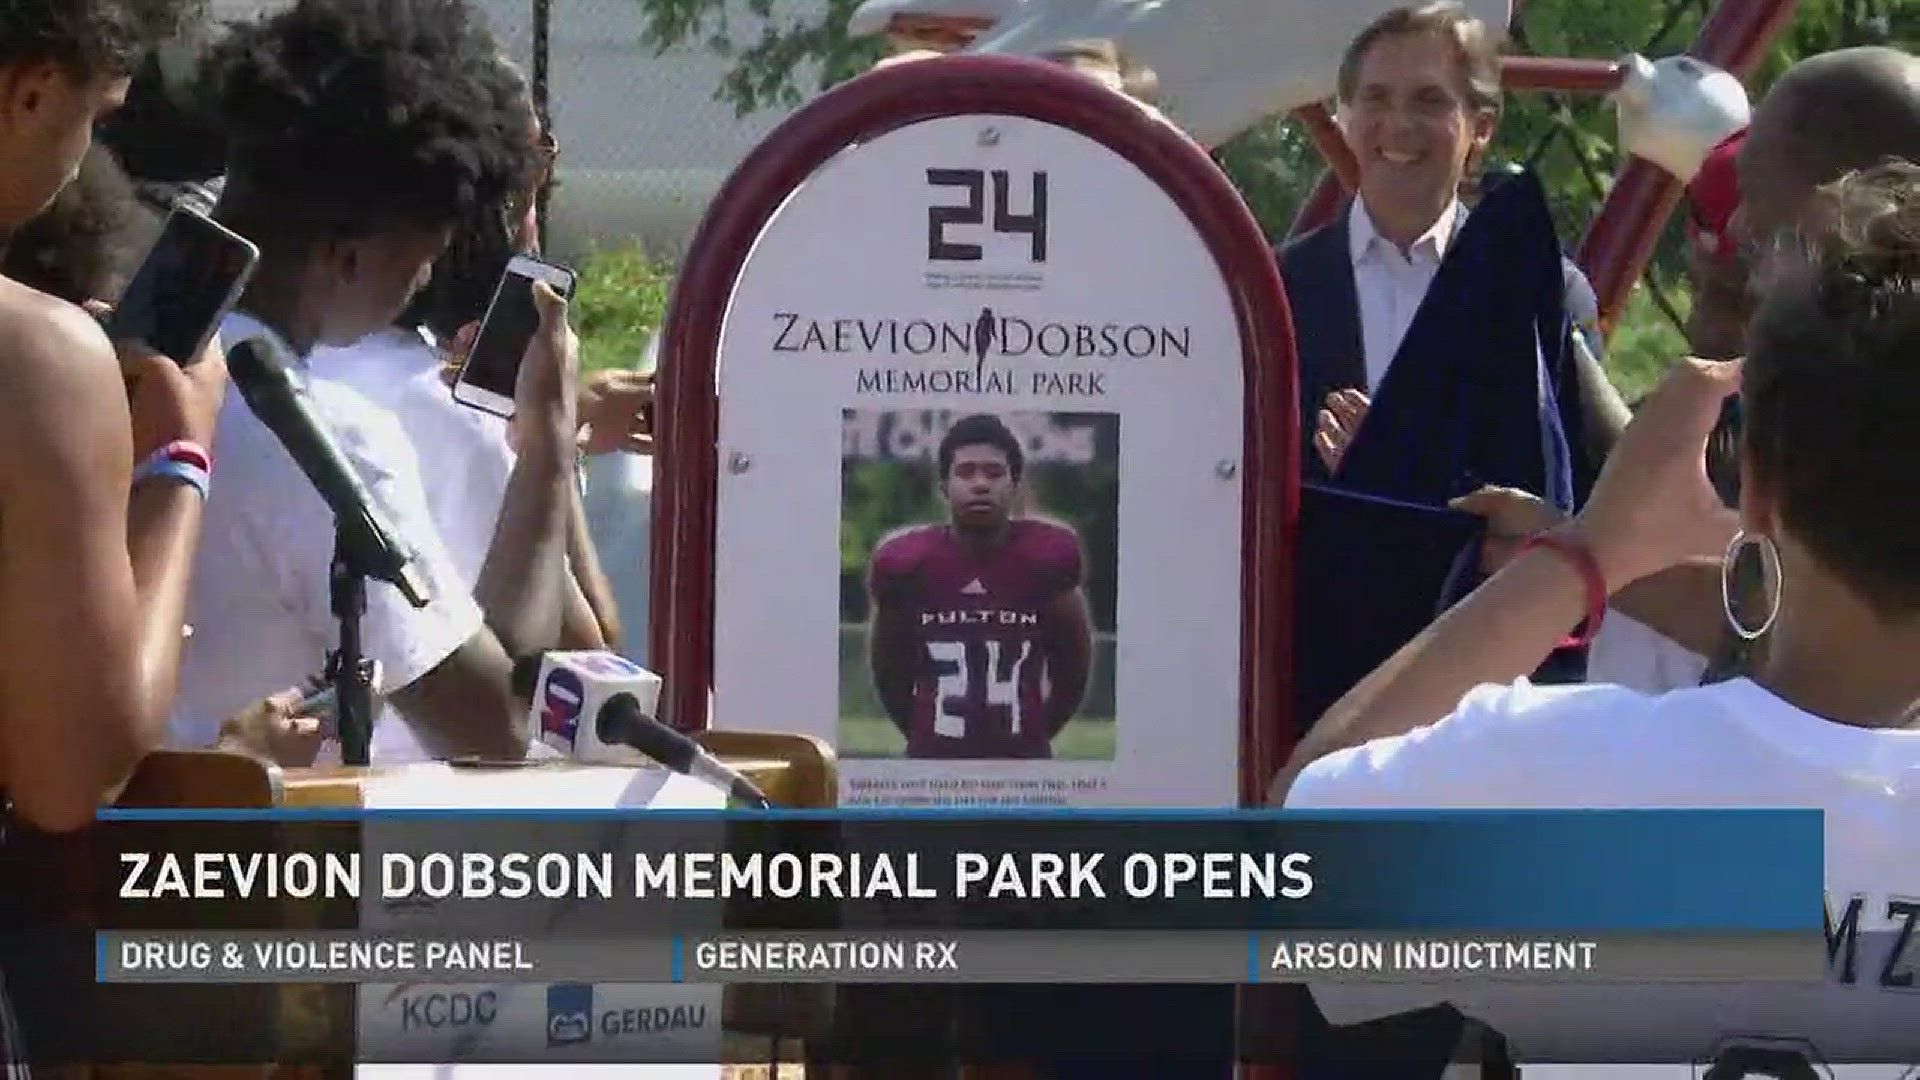 Kids got to enjoy their new park today that opened in honor of Zaevion Dobson.